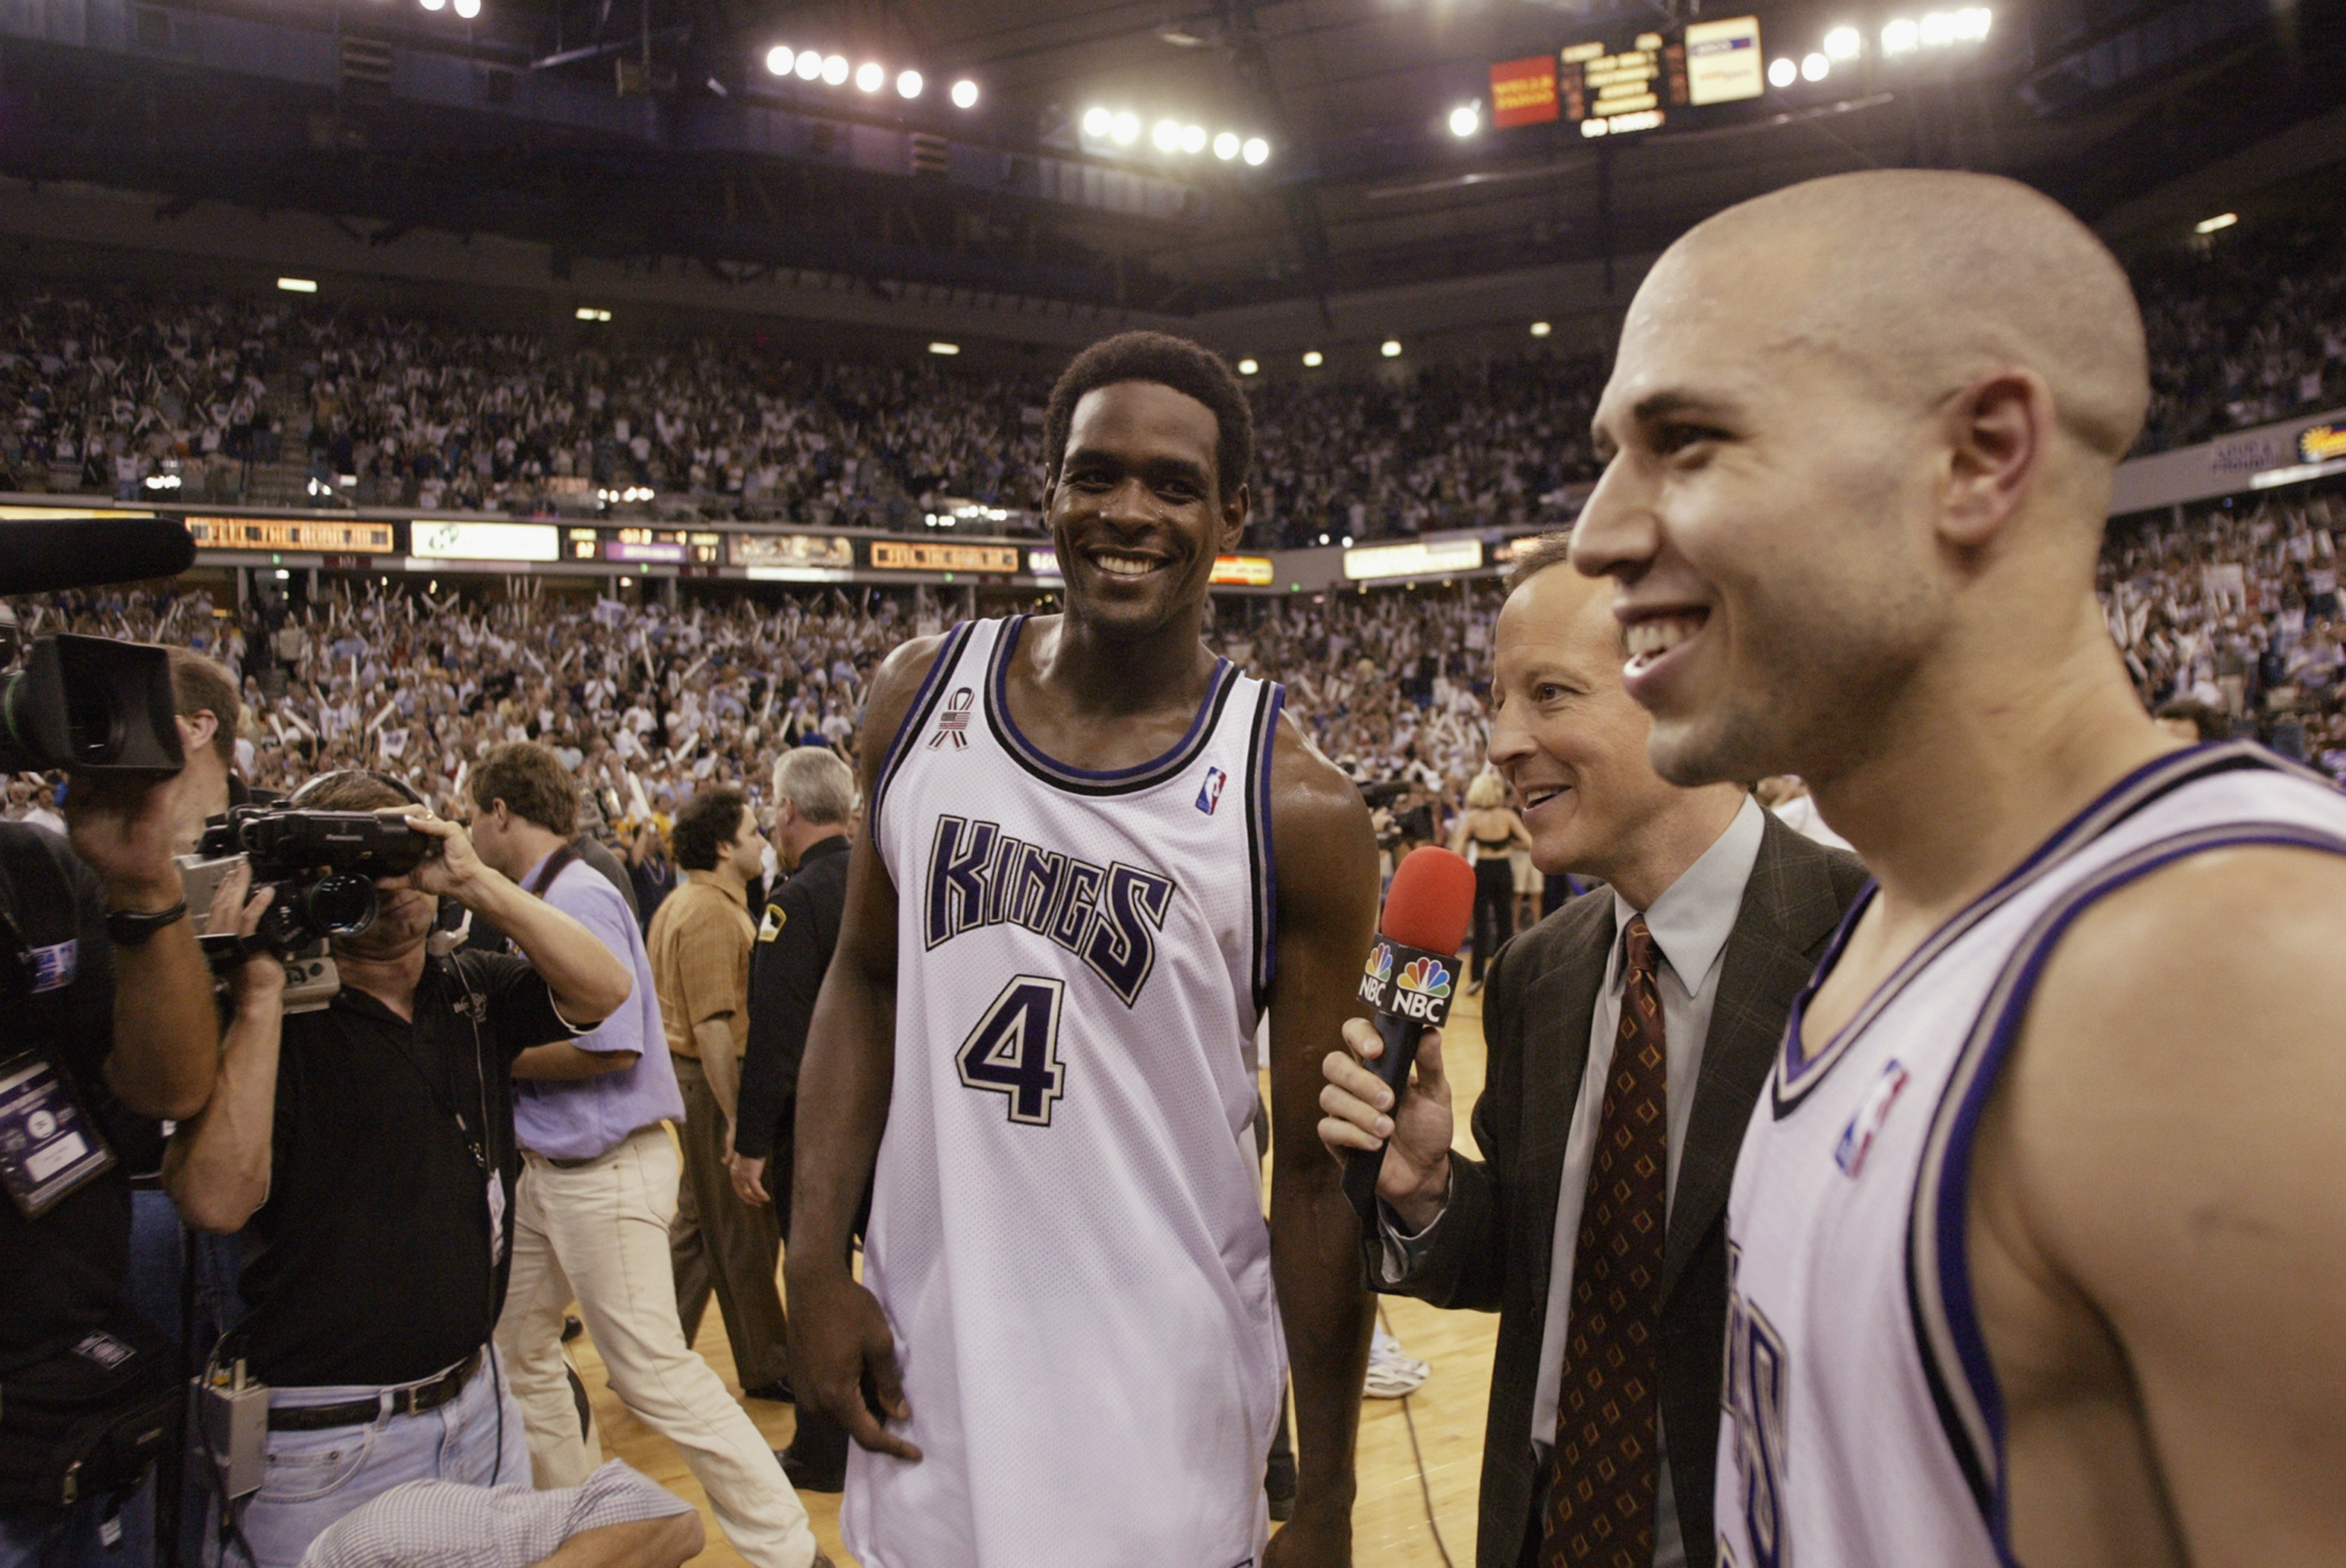 Chris Webber talks about playing in today's NBA - Basketball